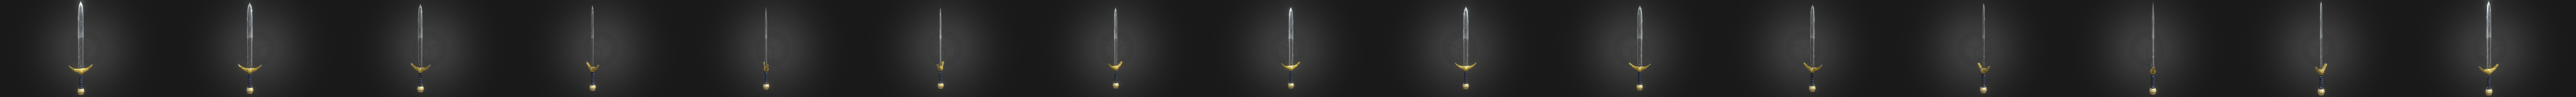 Roblox Linked Sword Remaster Download Free 3d Model By Sir Numb Sirnumb 0326504 - old swords from roblox